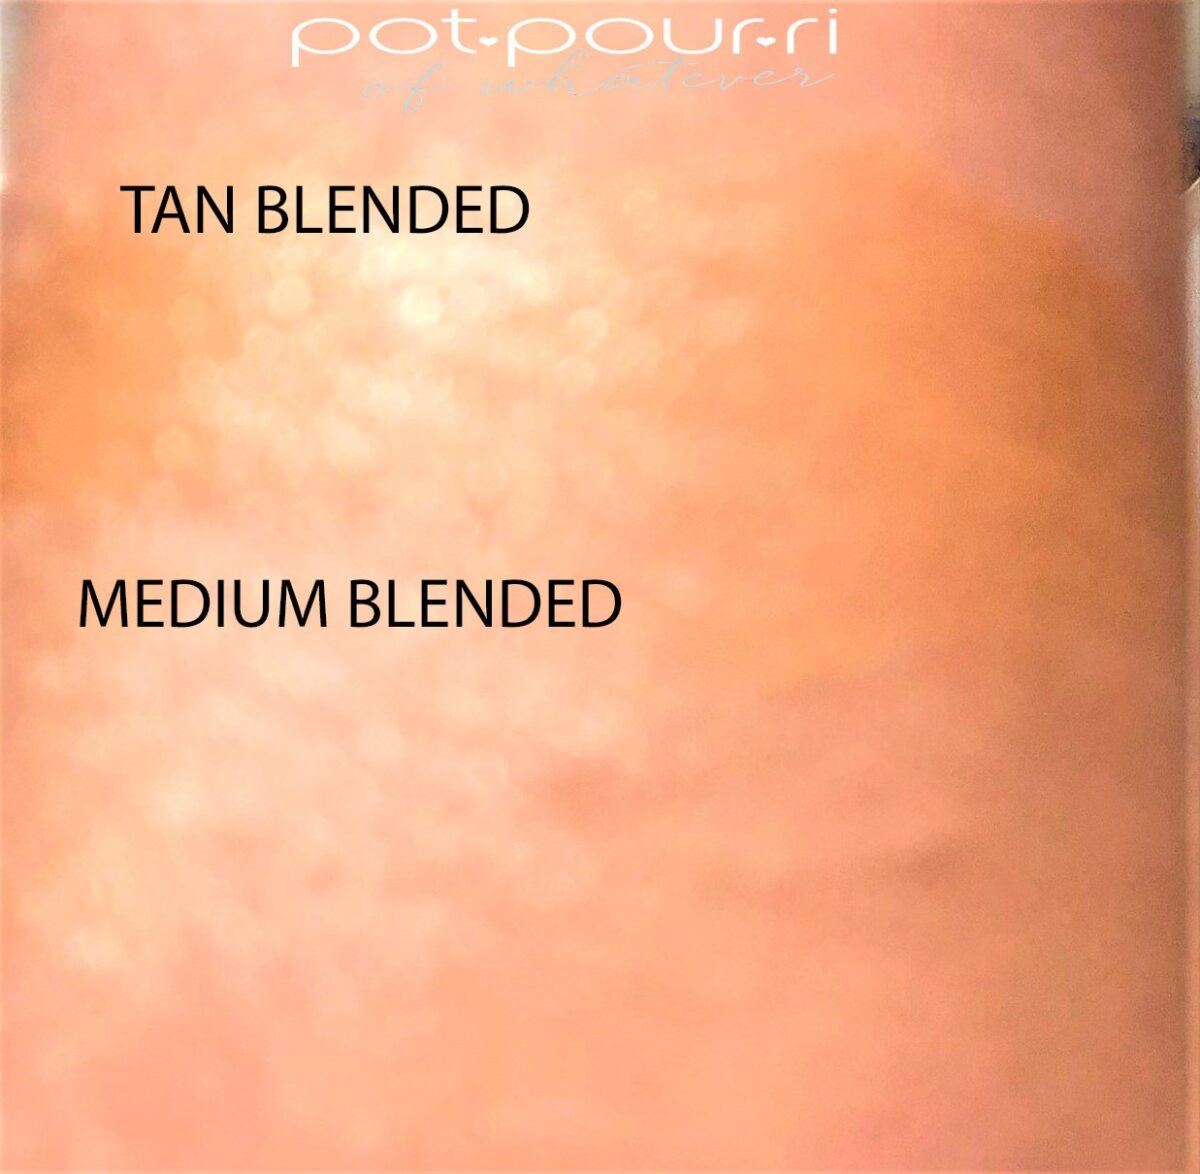 TAN AND MEDIUM HOLLYWOOD FLAWLESS FILTER SWATCHES